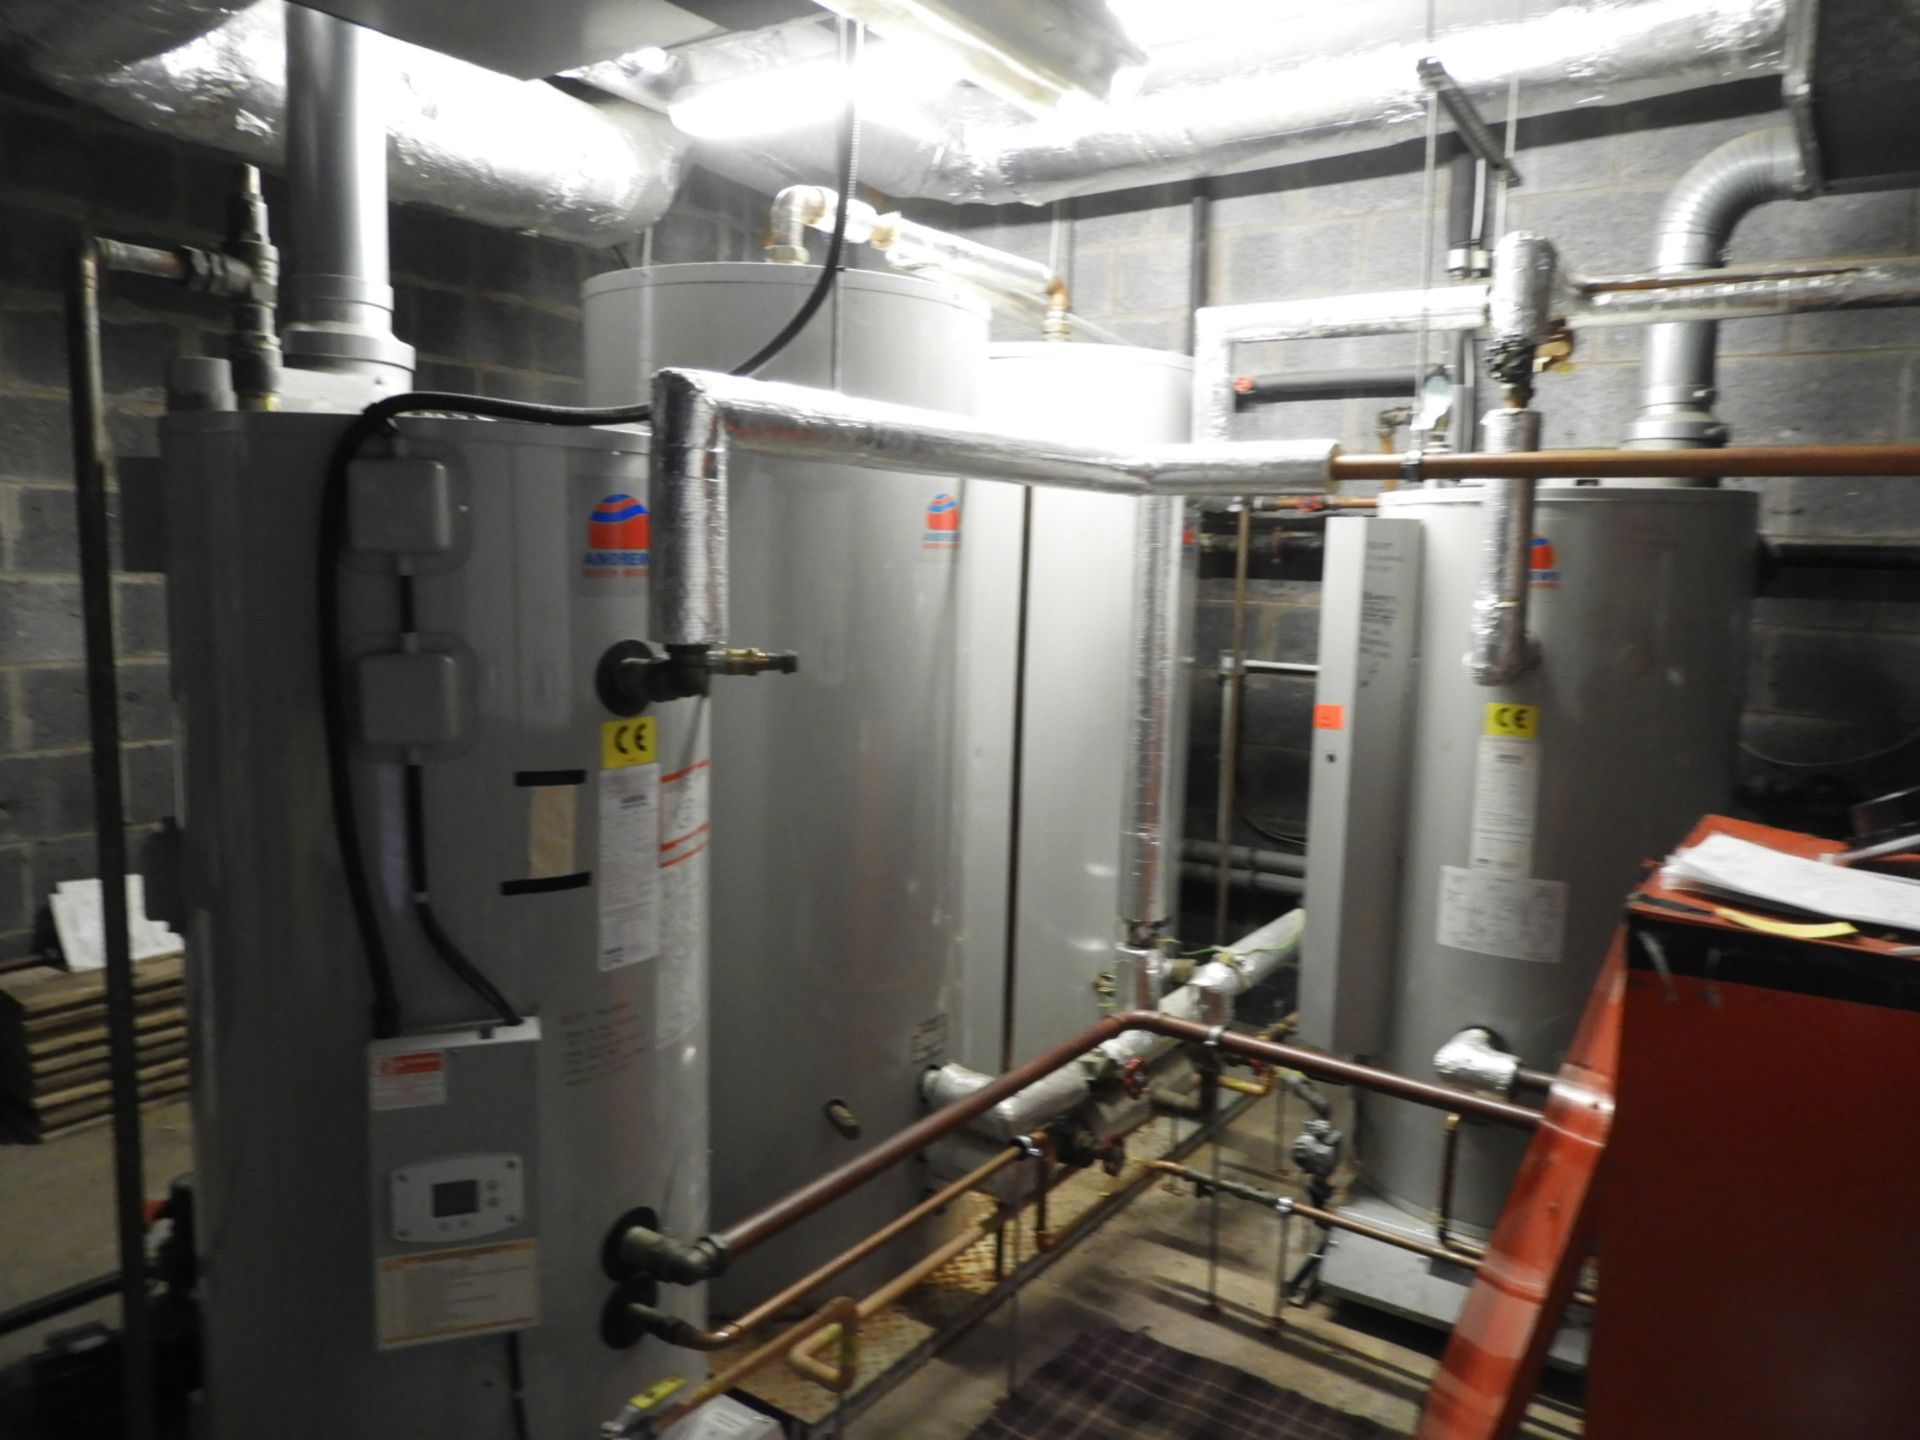 *Central Heating System as Fitted Throughout the Entire Hotel and Leisure Facility Establishment - Image 2 of 3